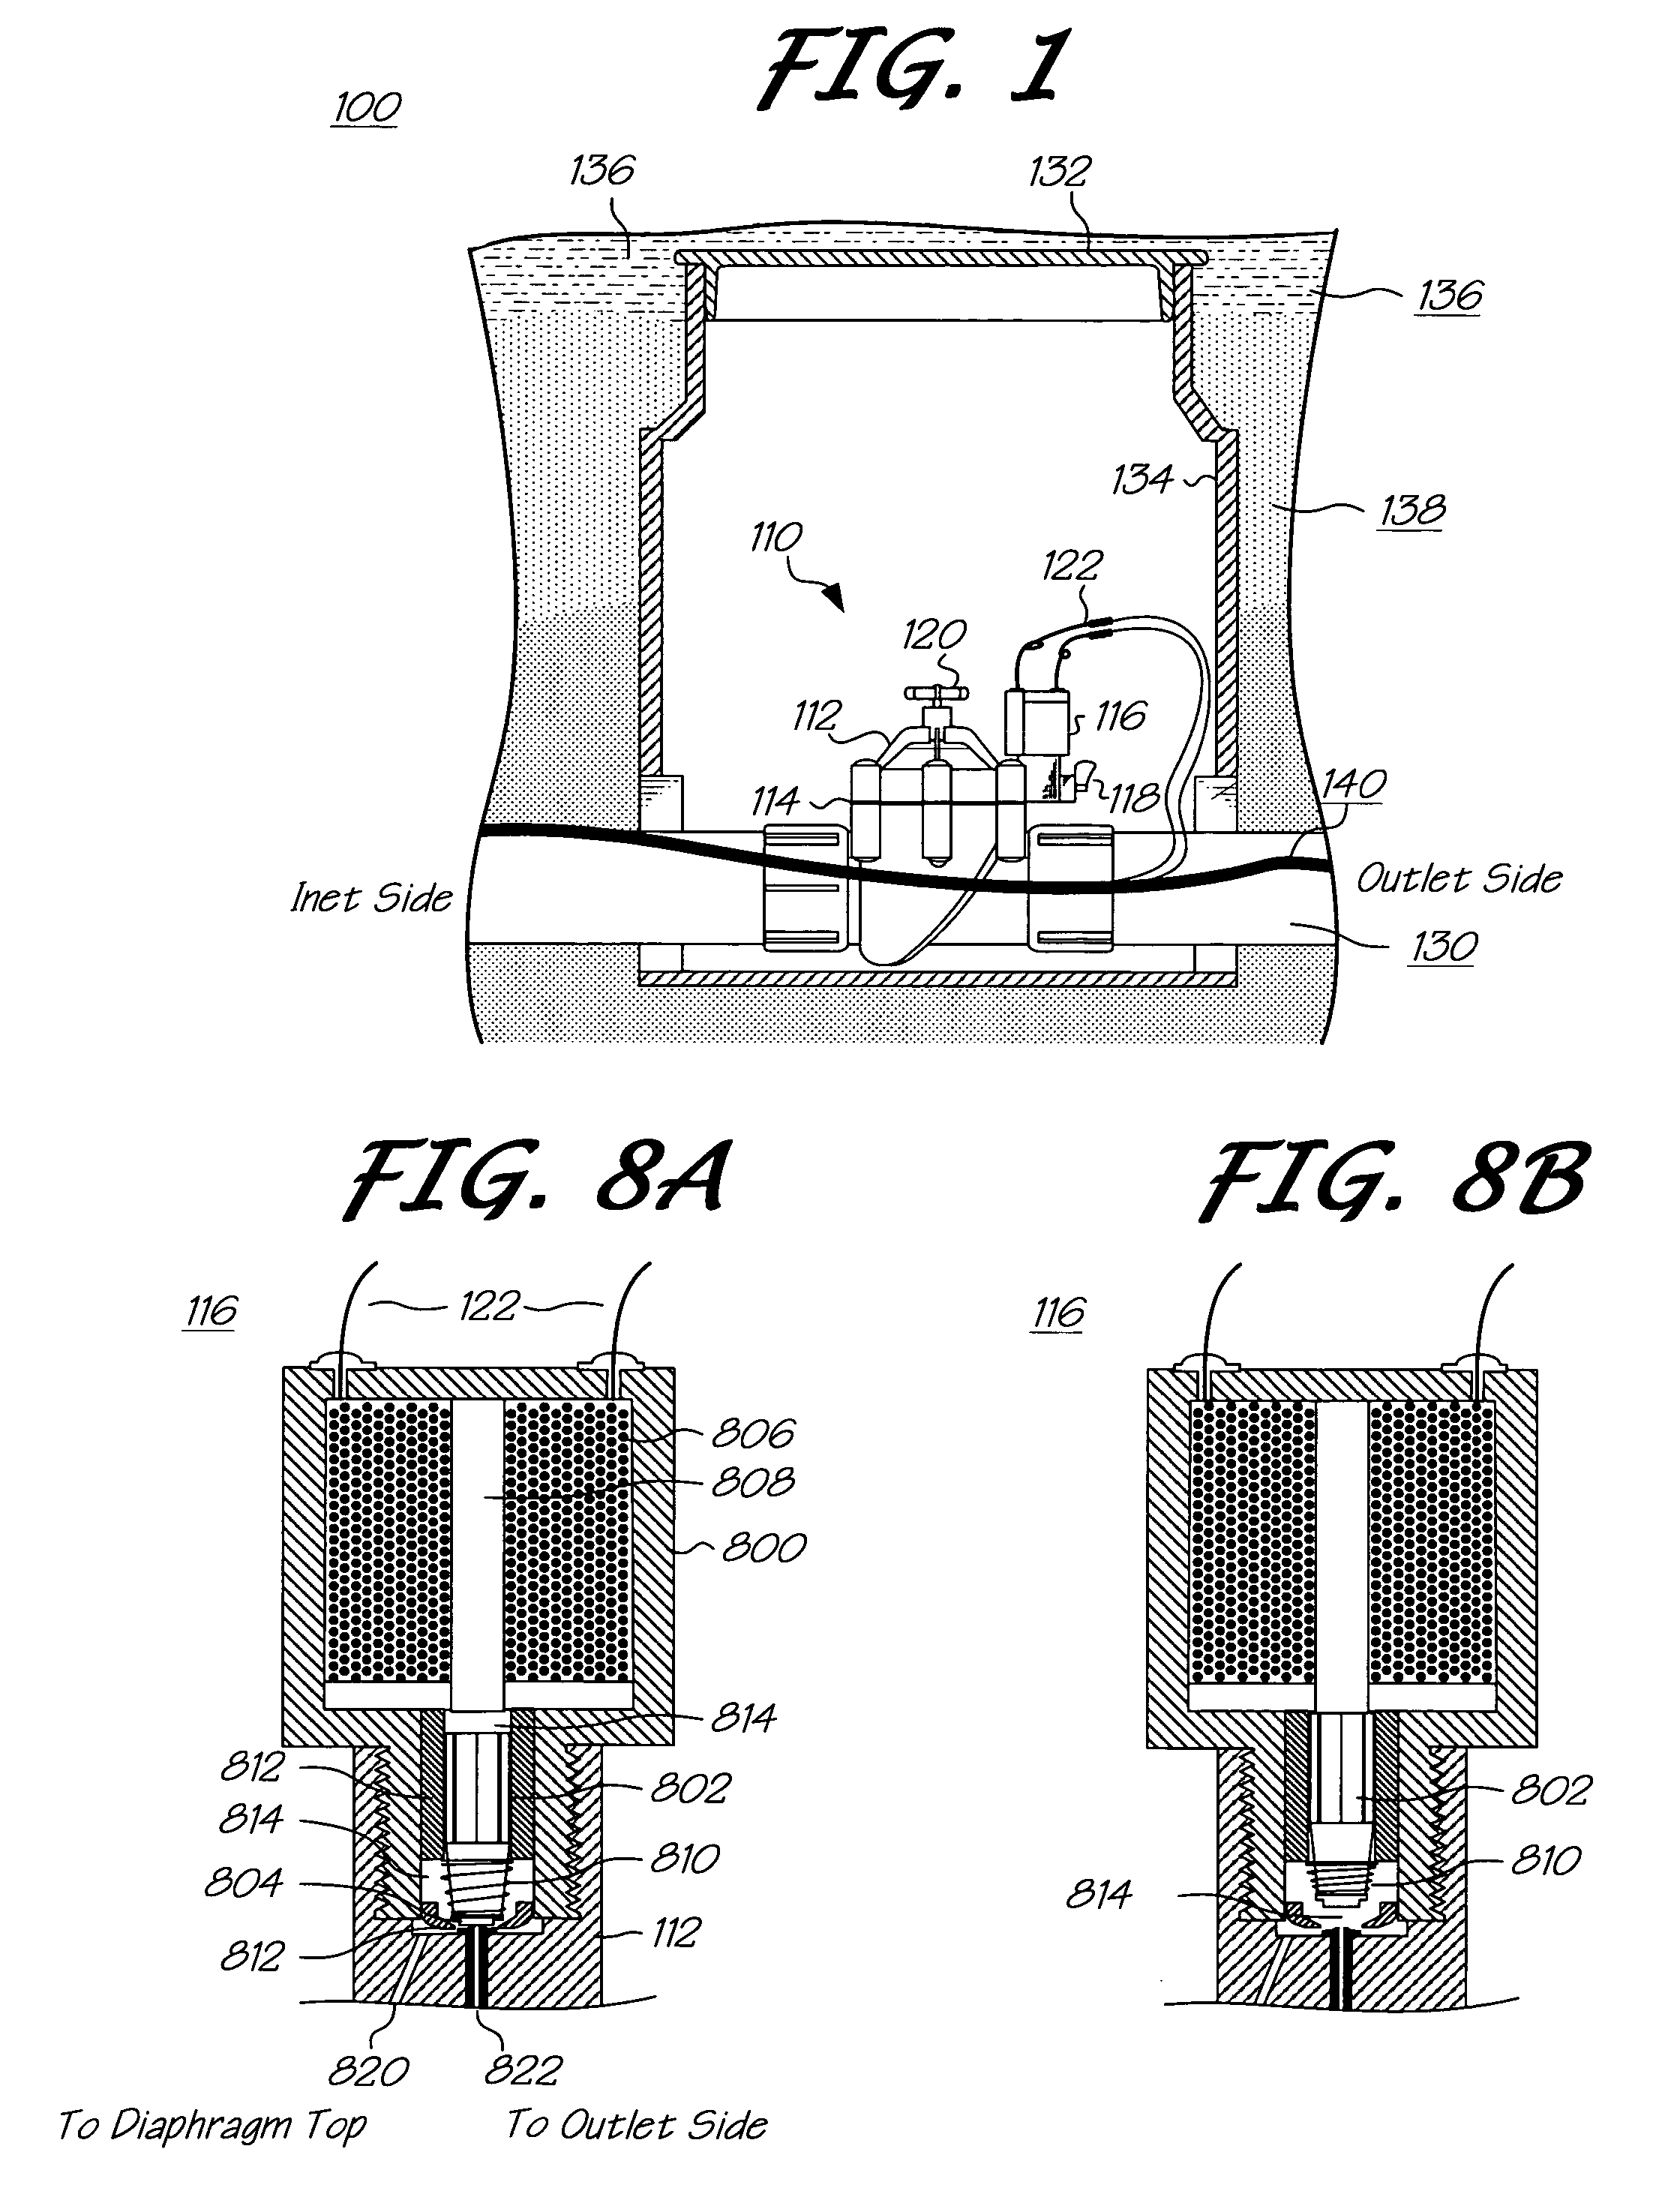 Irrigation controller with integrated valve locator